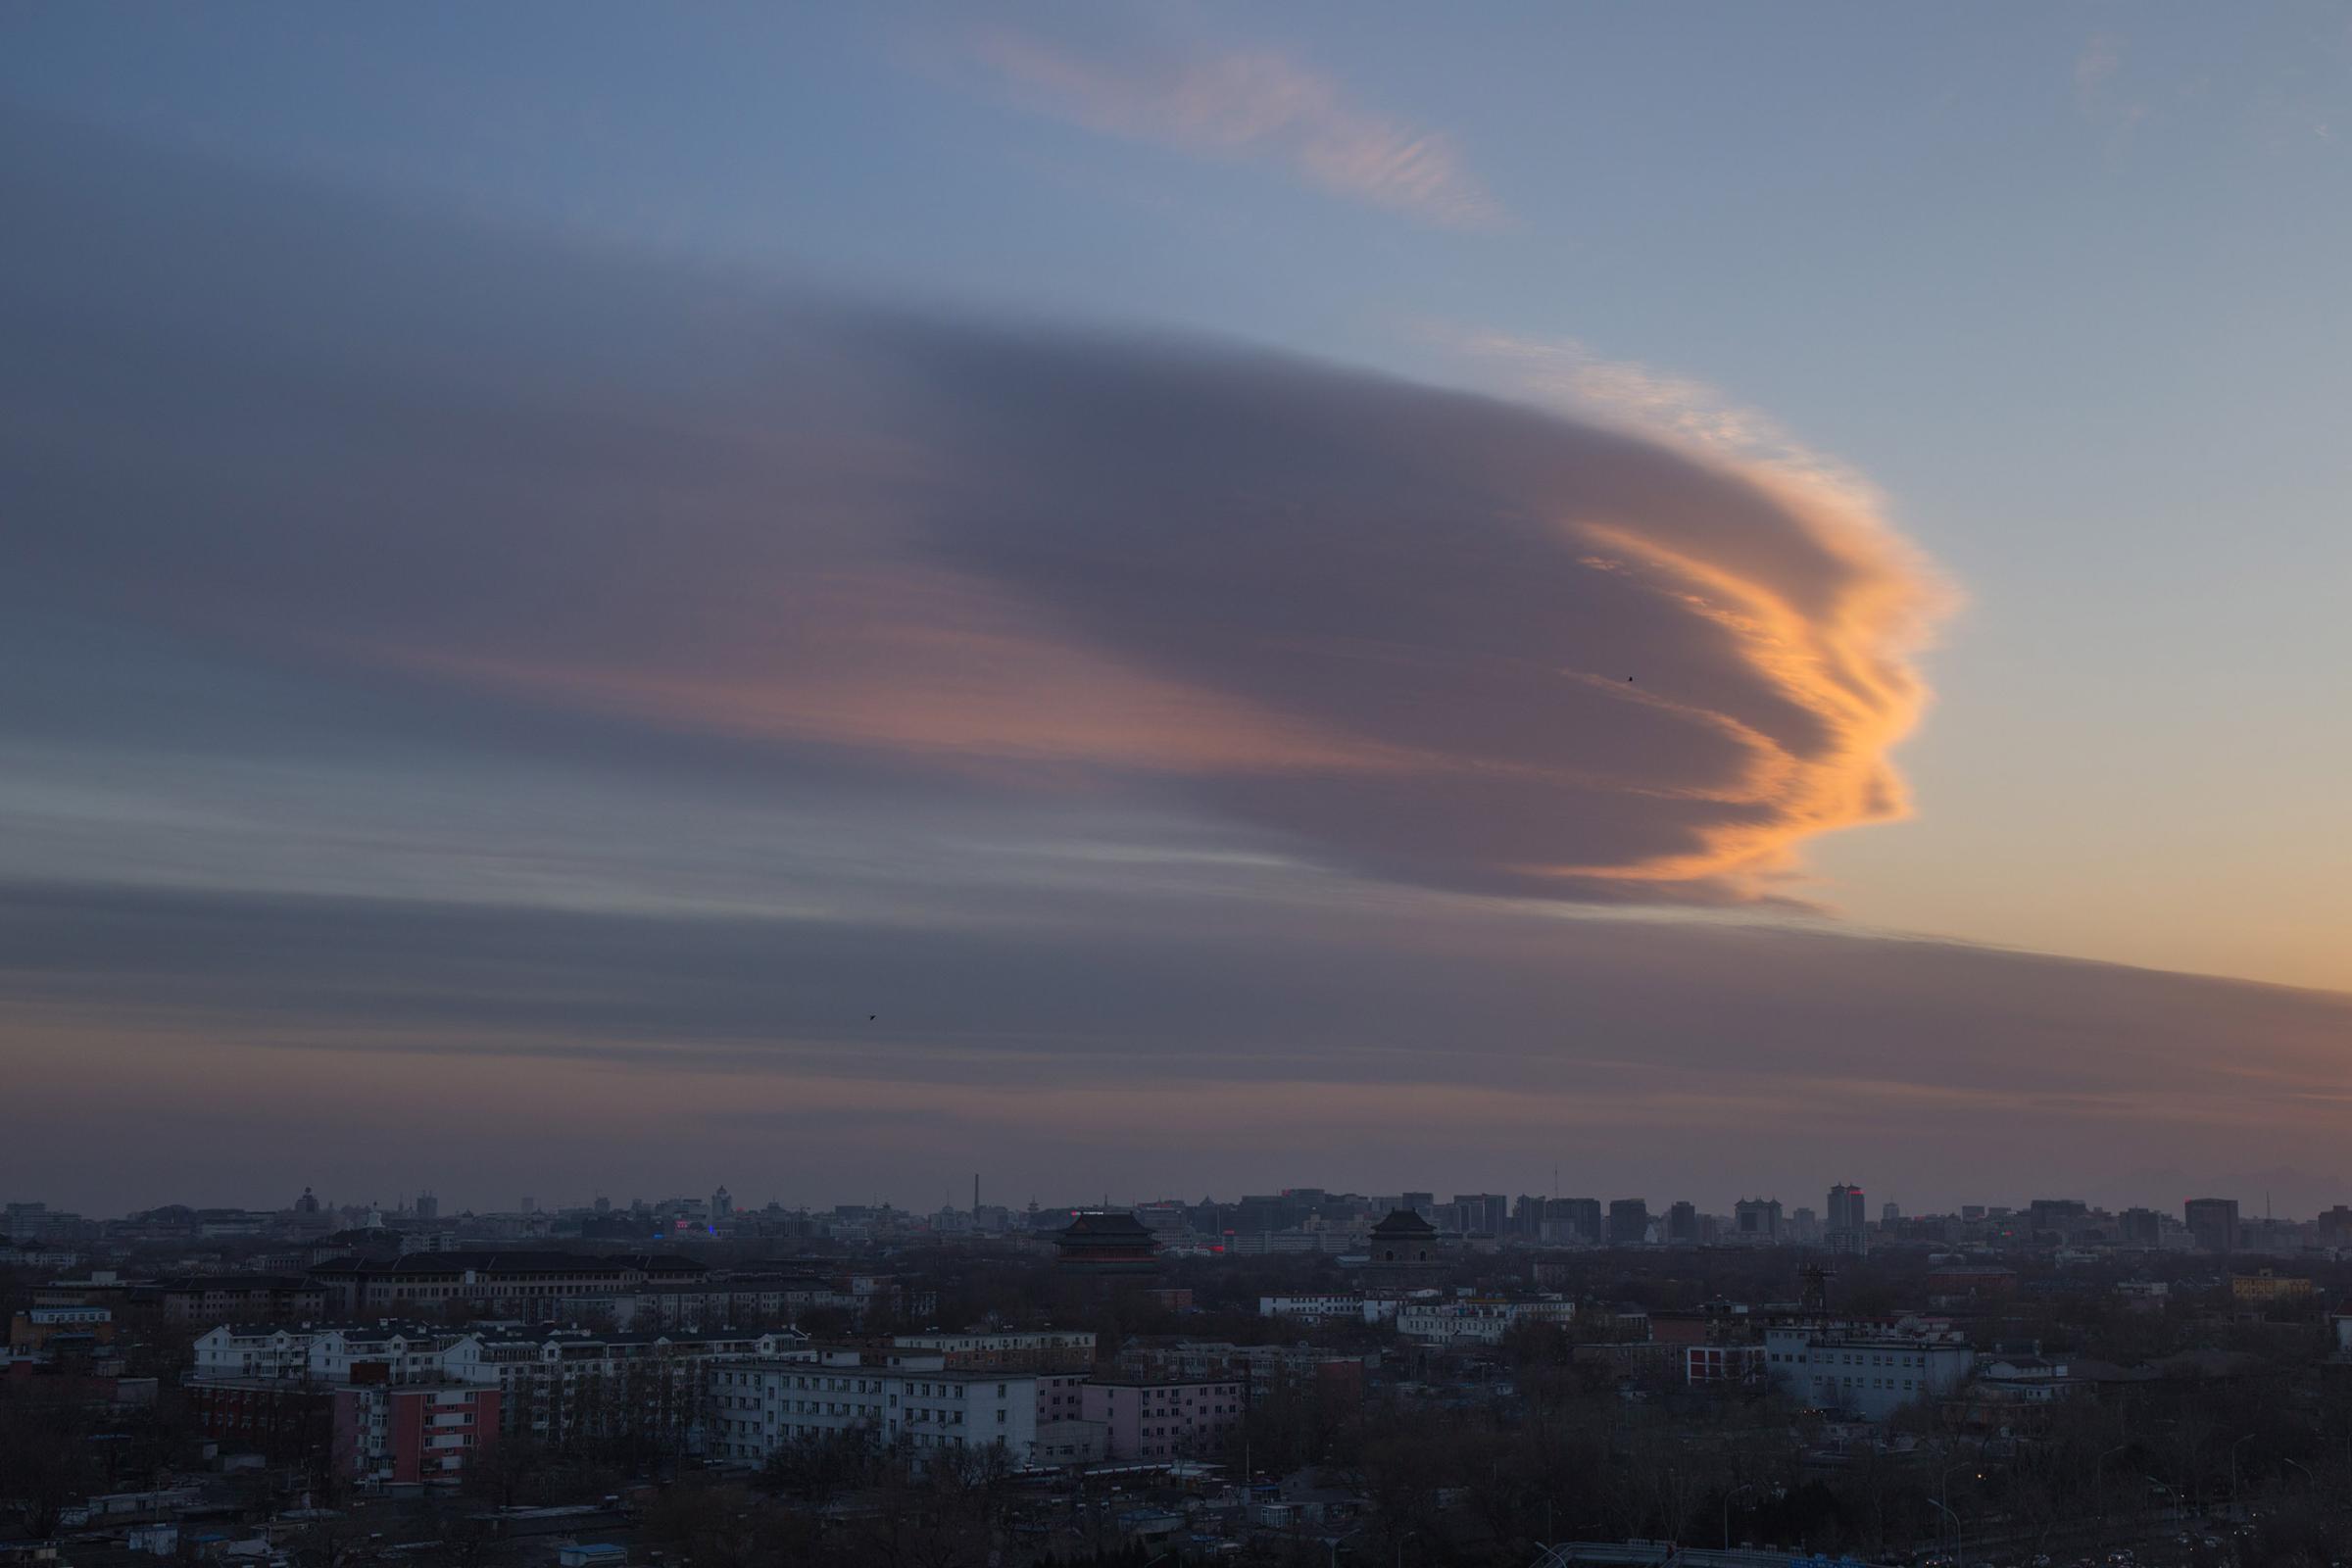 A meteorite-shaped cloud floats in the sky at nightfall in Beijing, China, on March 7, 2016.